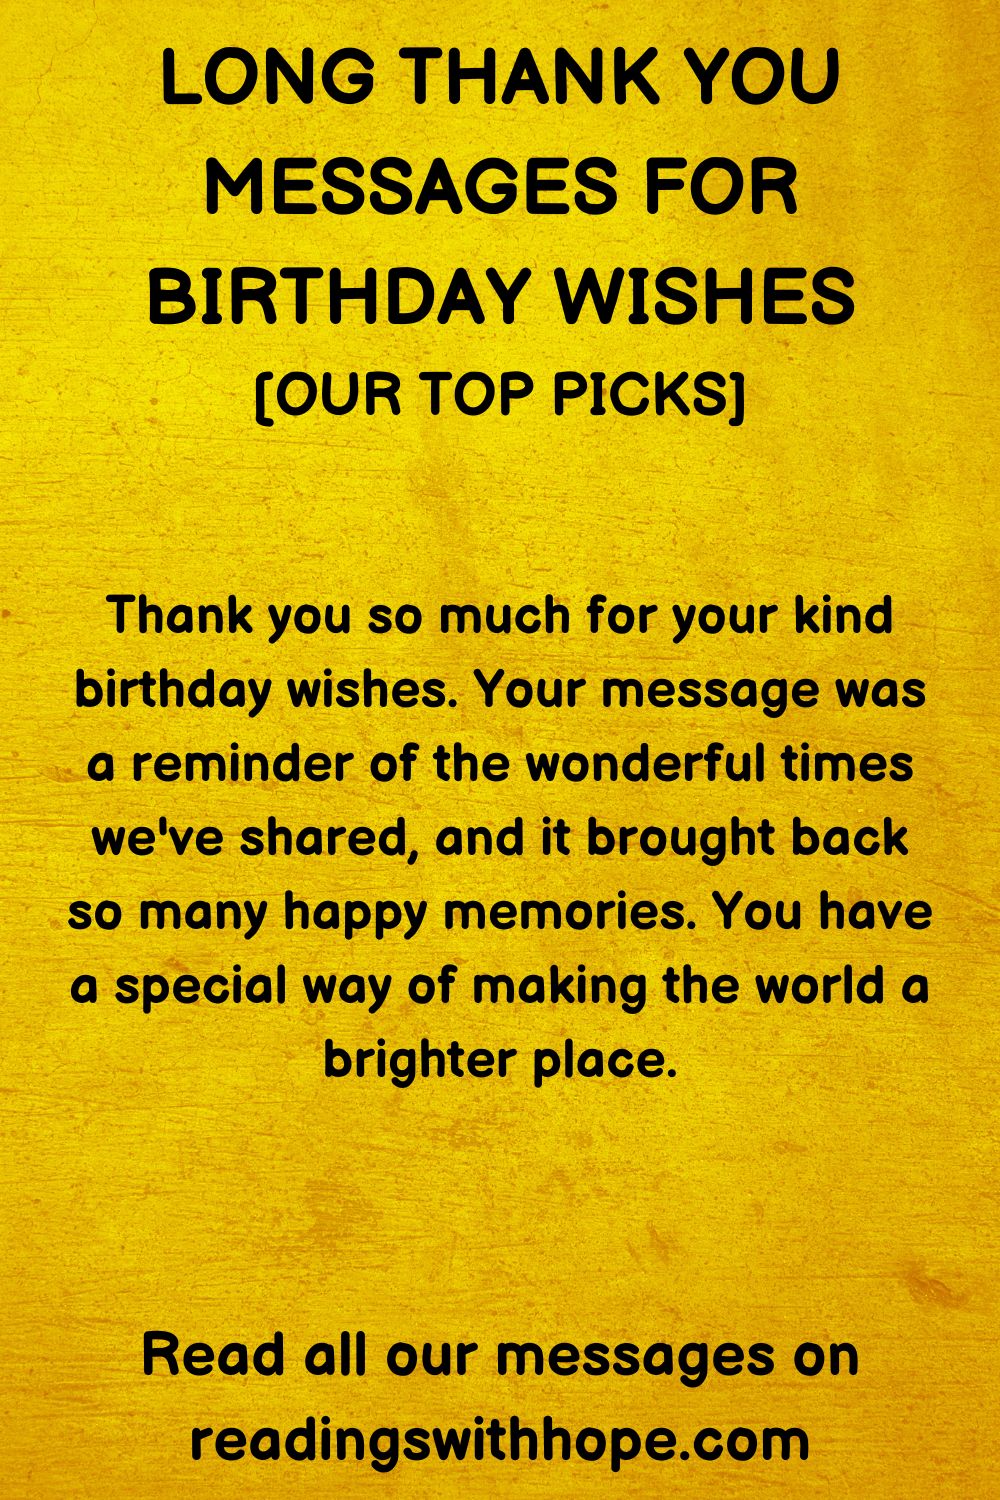 long thank you message for birthday wishes